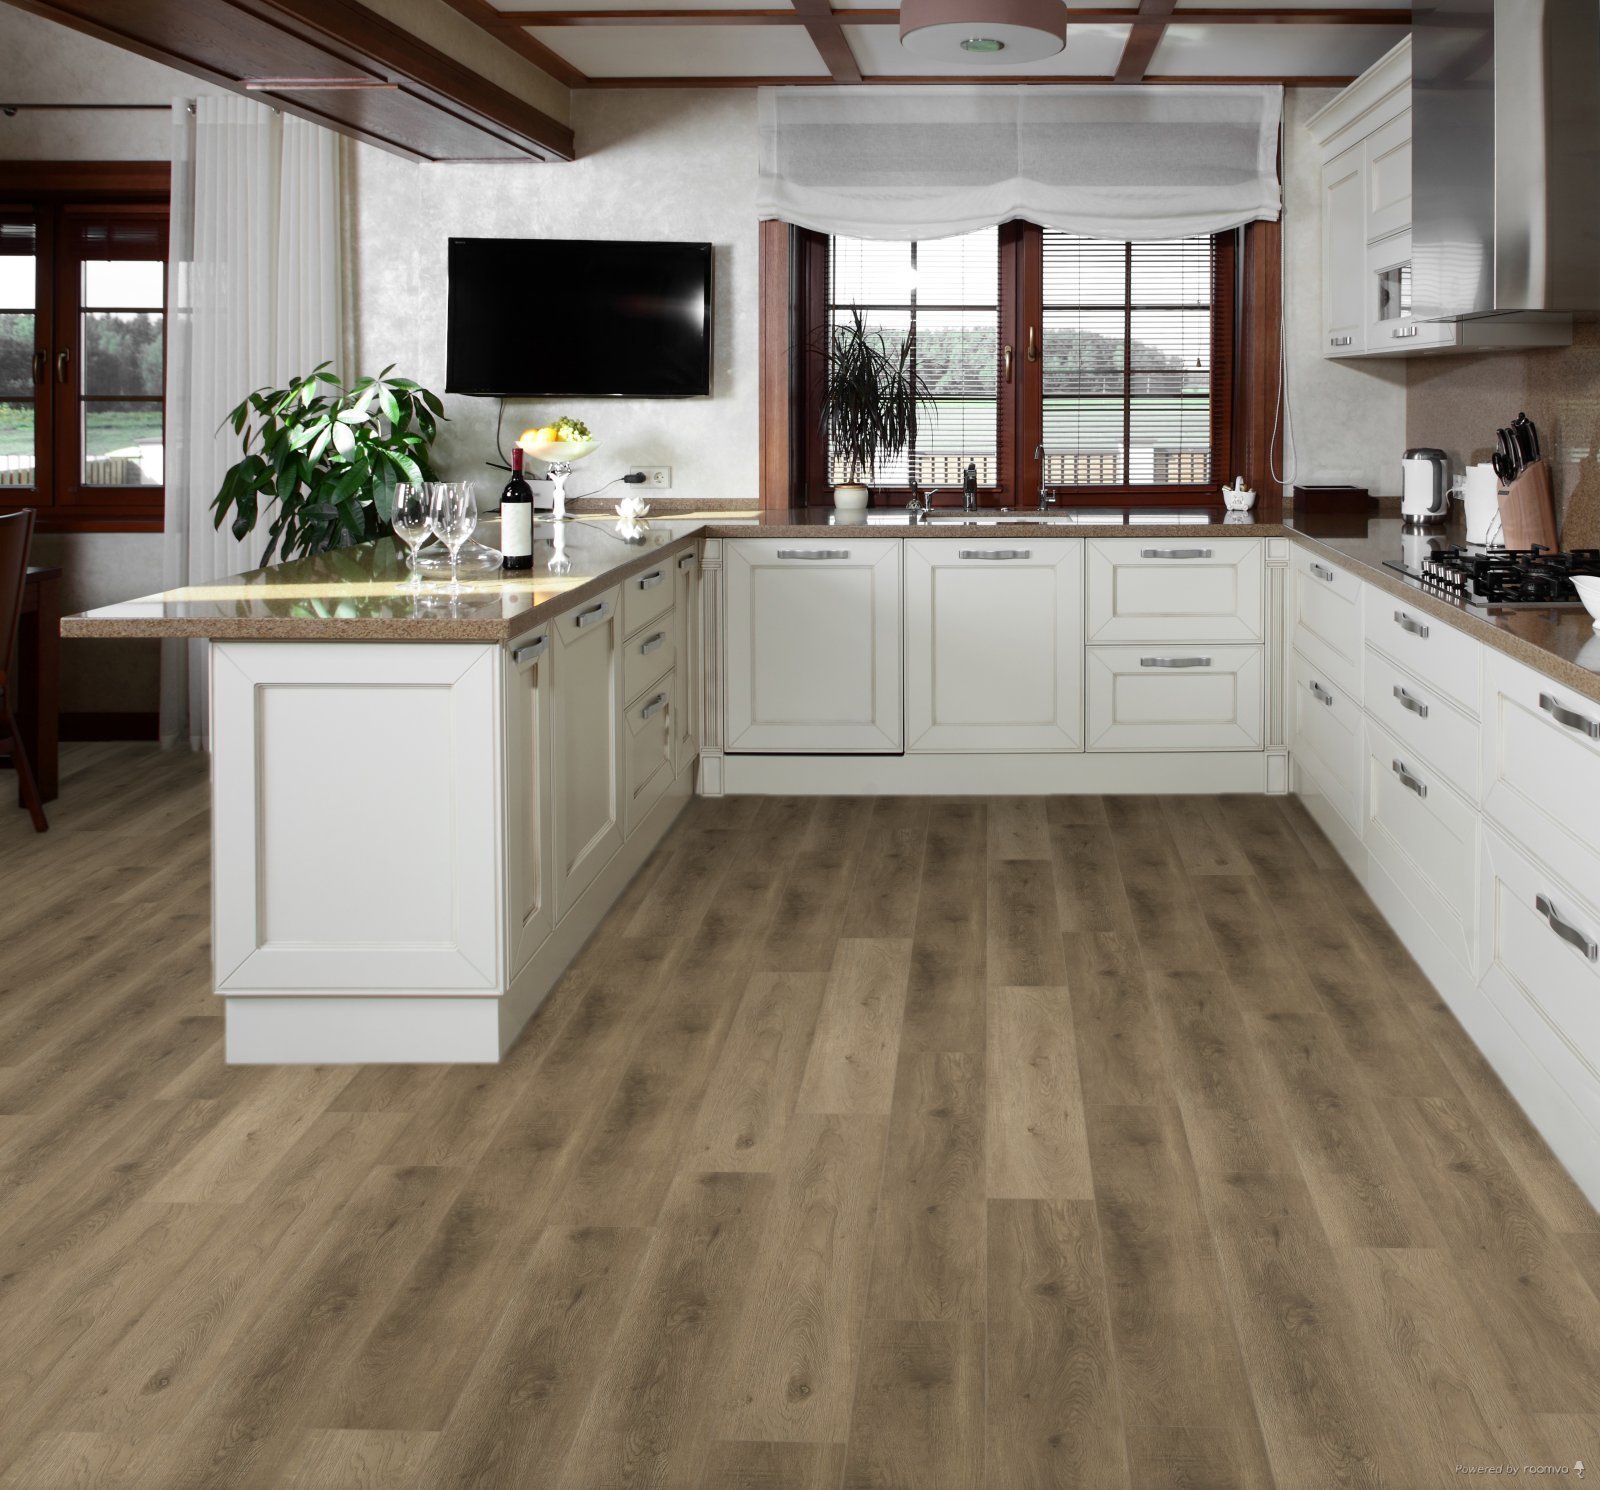 Horizen Flooring presents to you a picture of a quality wide plank Ponderosa luxury vinyl plank. NovoCore Premium EIR collection features a wide range of colors & designs that will compliment any interior. Natural wood grain synchronized surface allow for an authentic hardwood look & feel. This collection features a 0.25″ / 6.5 mm overall thickness and a durable 22 mil / 0.55 mm wear layer for residential and commercial applications.